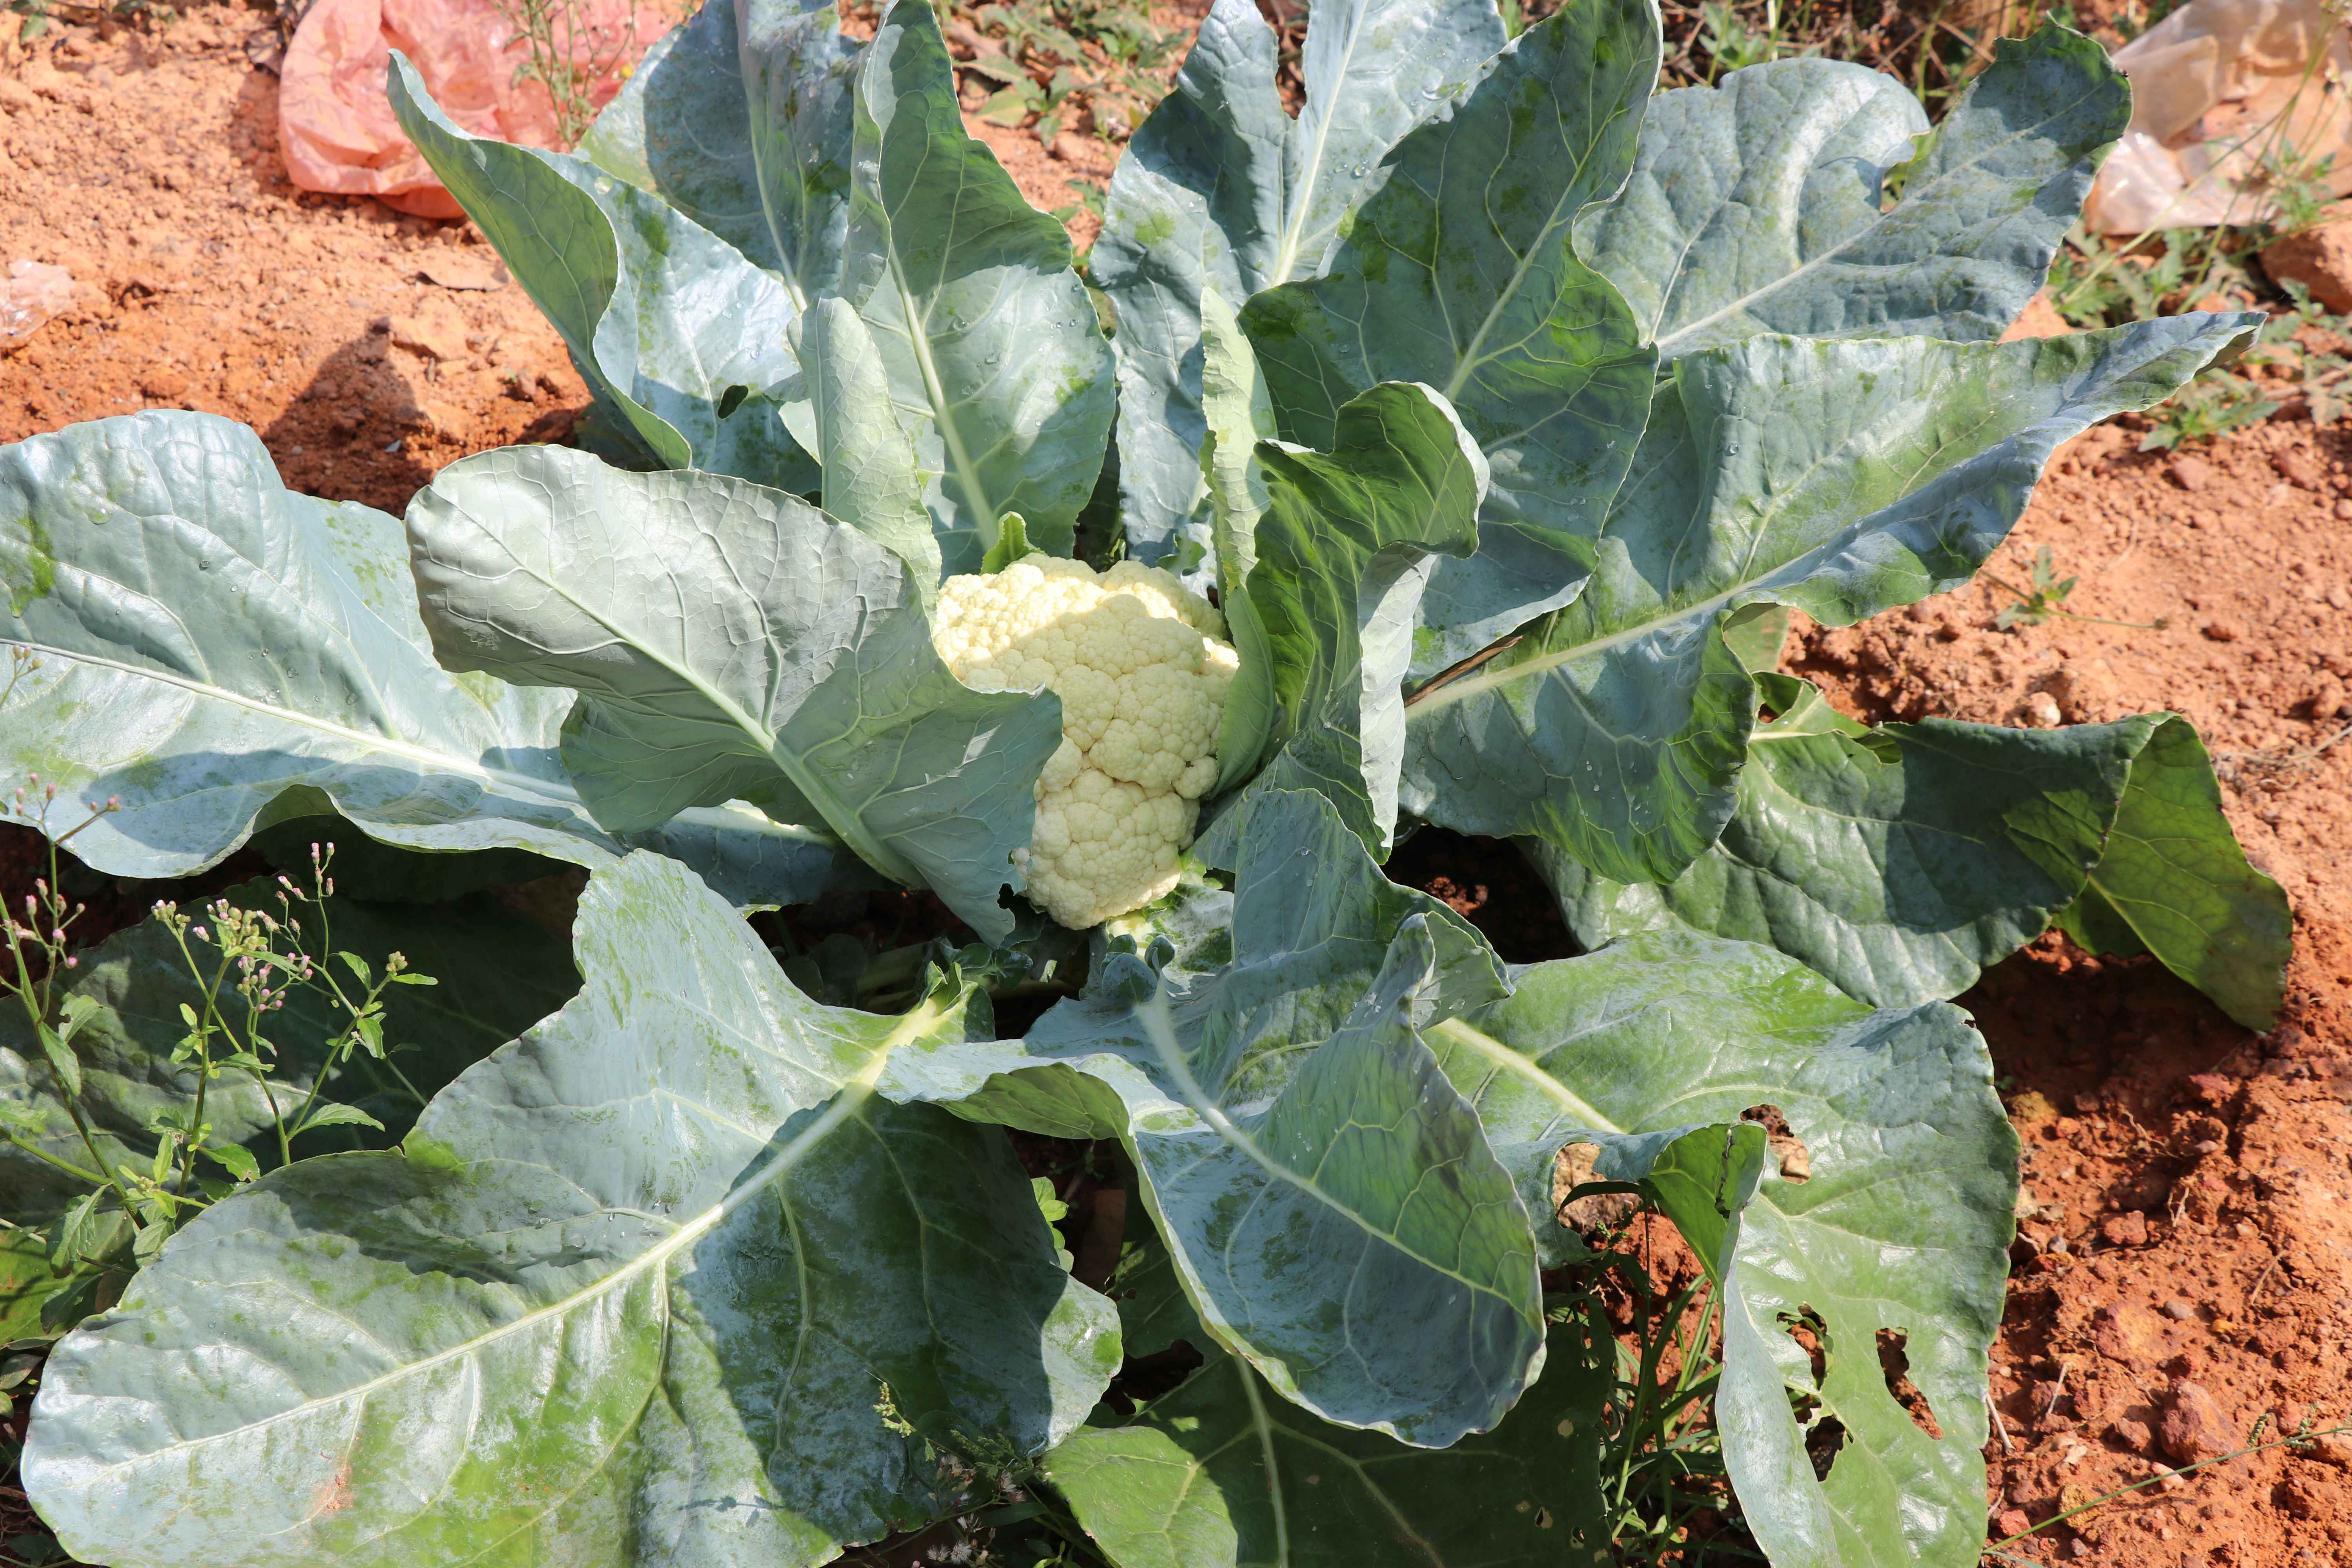 Green Vegetable Cultivation